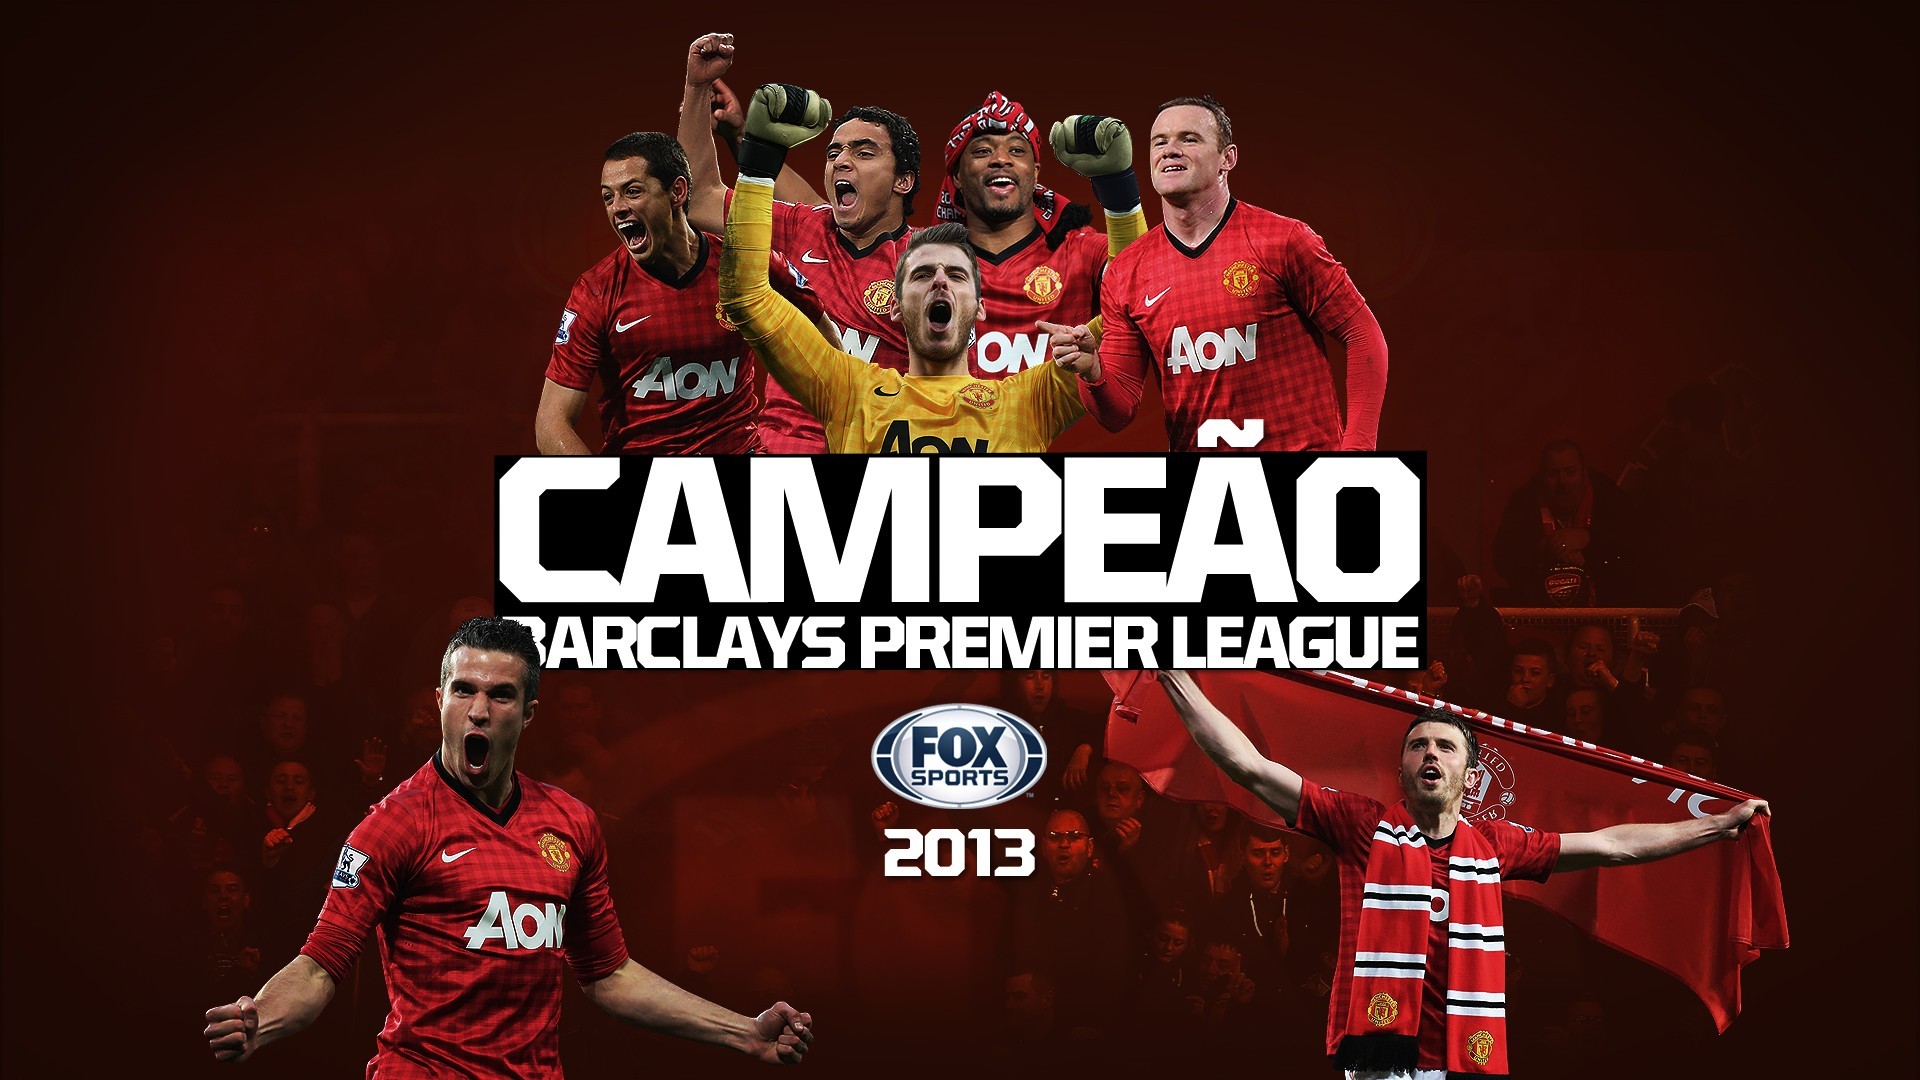 1920x1080 Football Manchester United Fc Red Devils Champions Teams Utd Premier League  Soccer Sports #wallpapers #